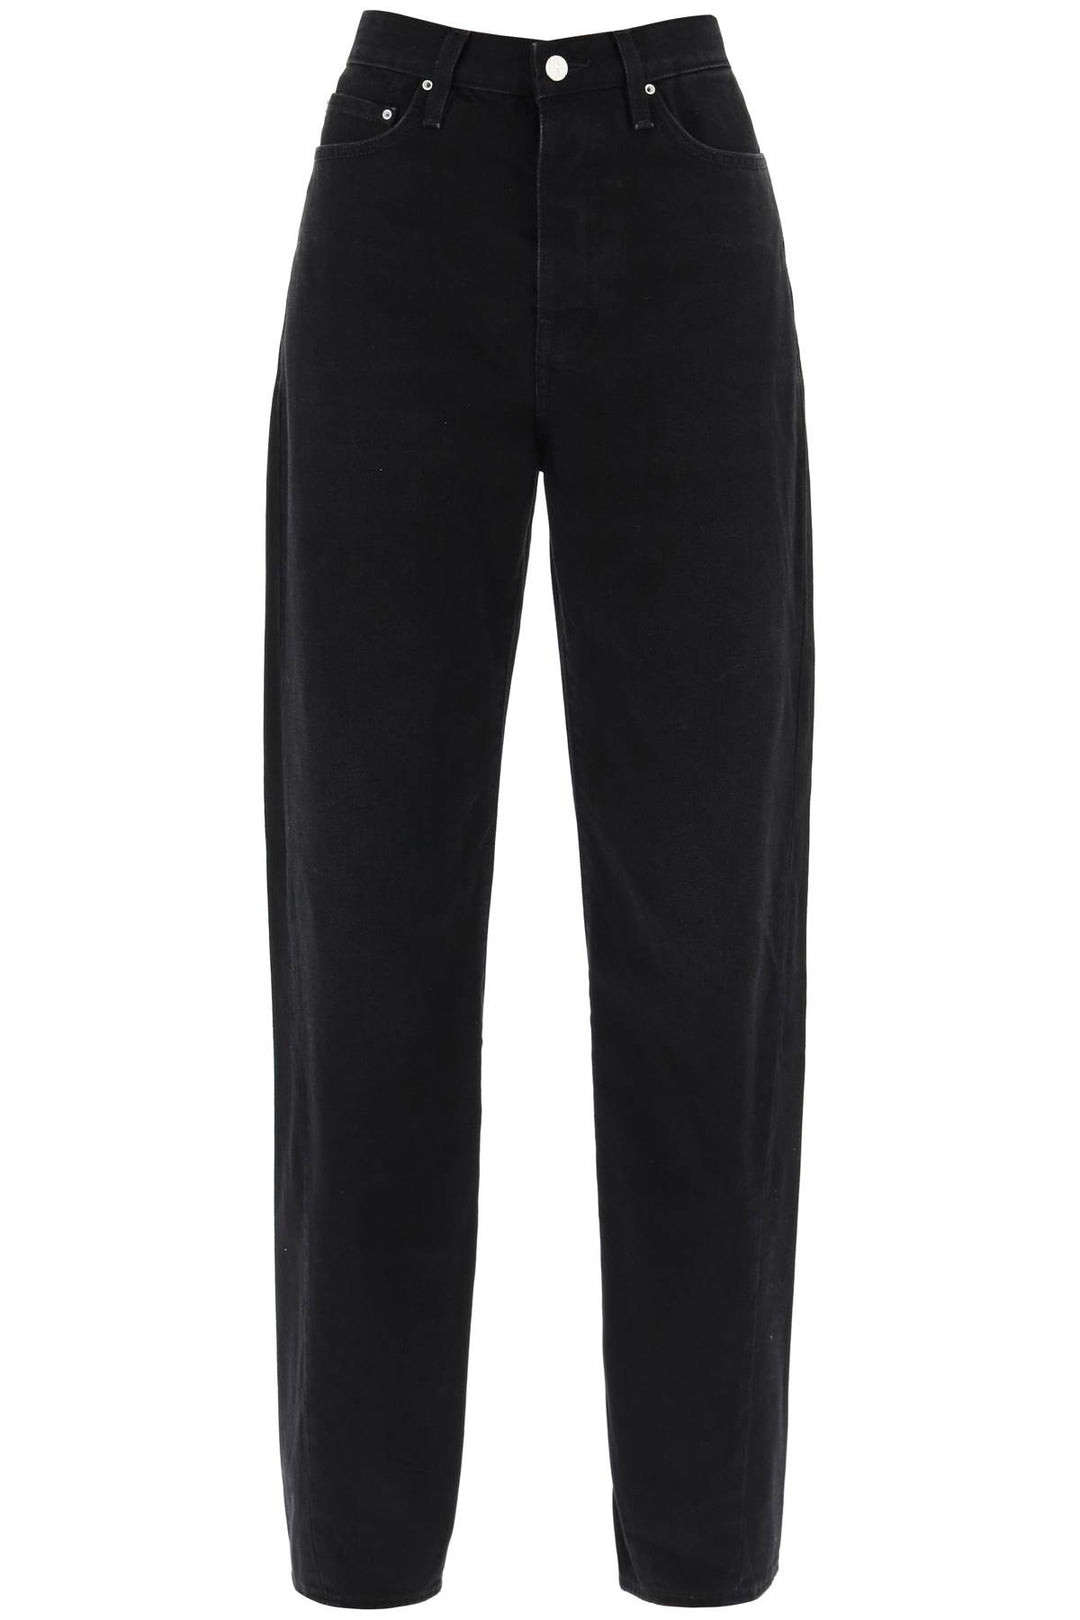 Toteme Jeans With Dark Wash And Twisted Seams   Nero